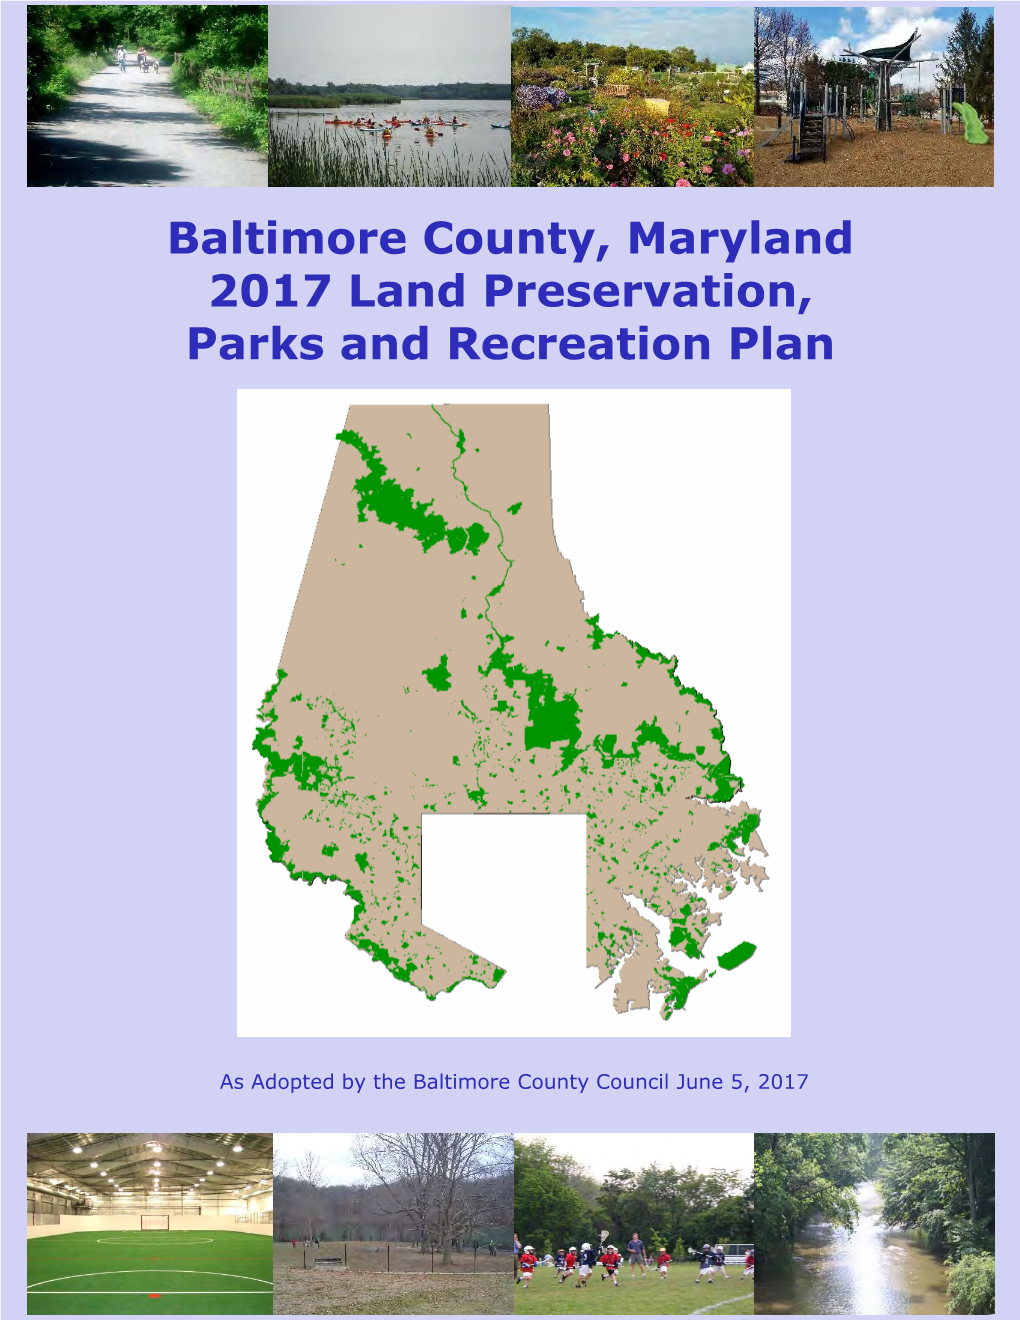 Baltimore County, Maryland 2017 Land Preservation, Parks and Recreation Plan